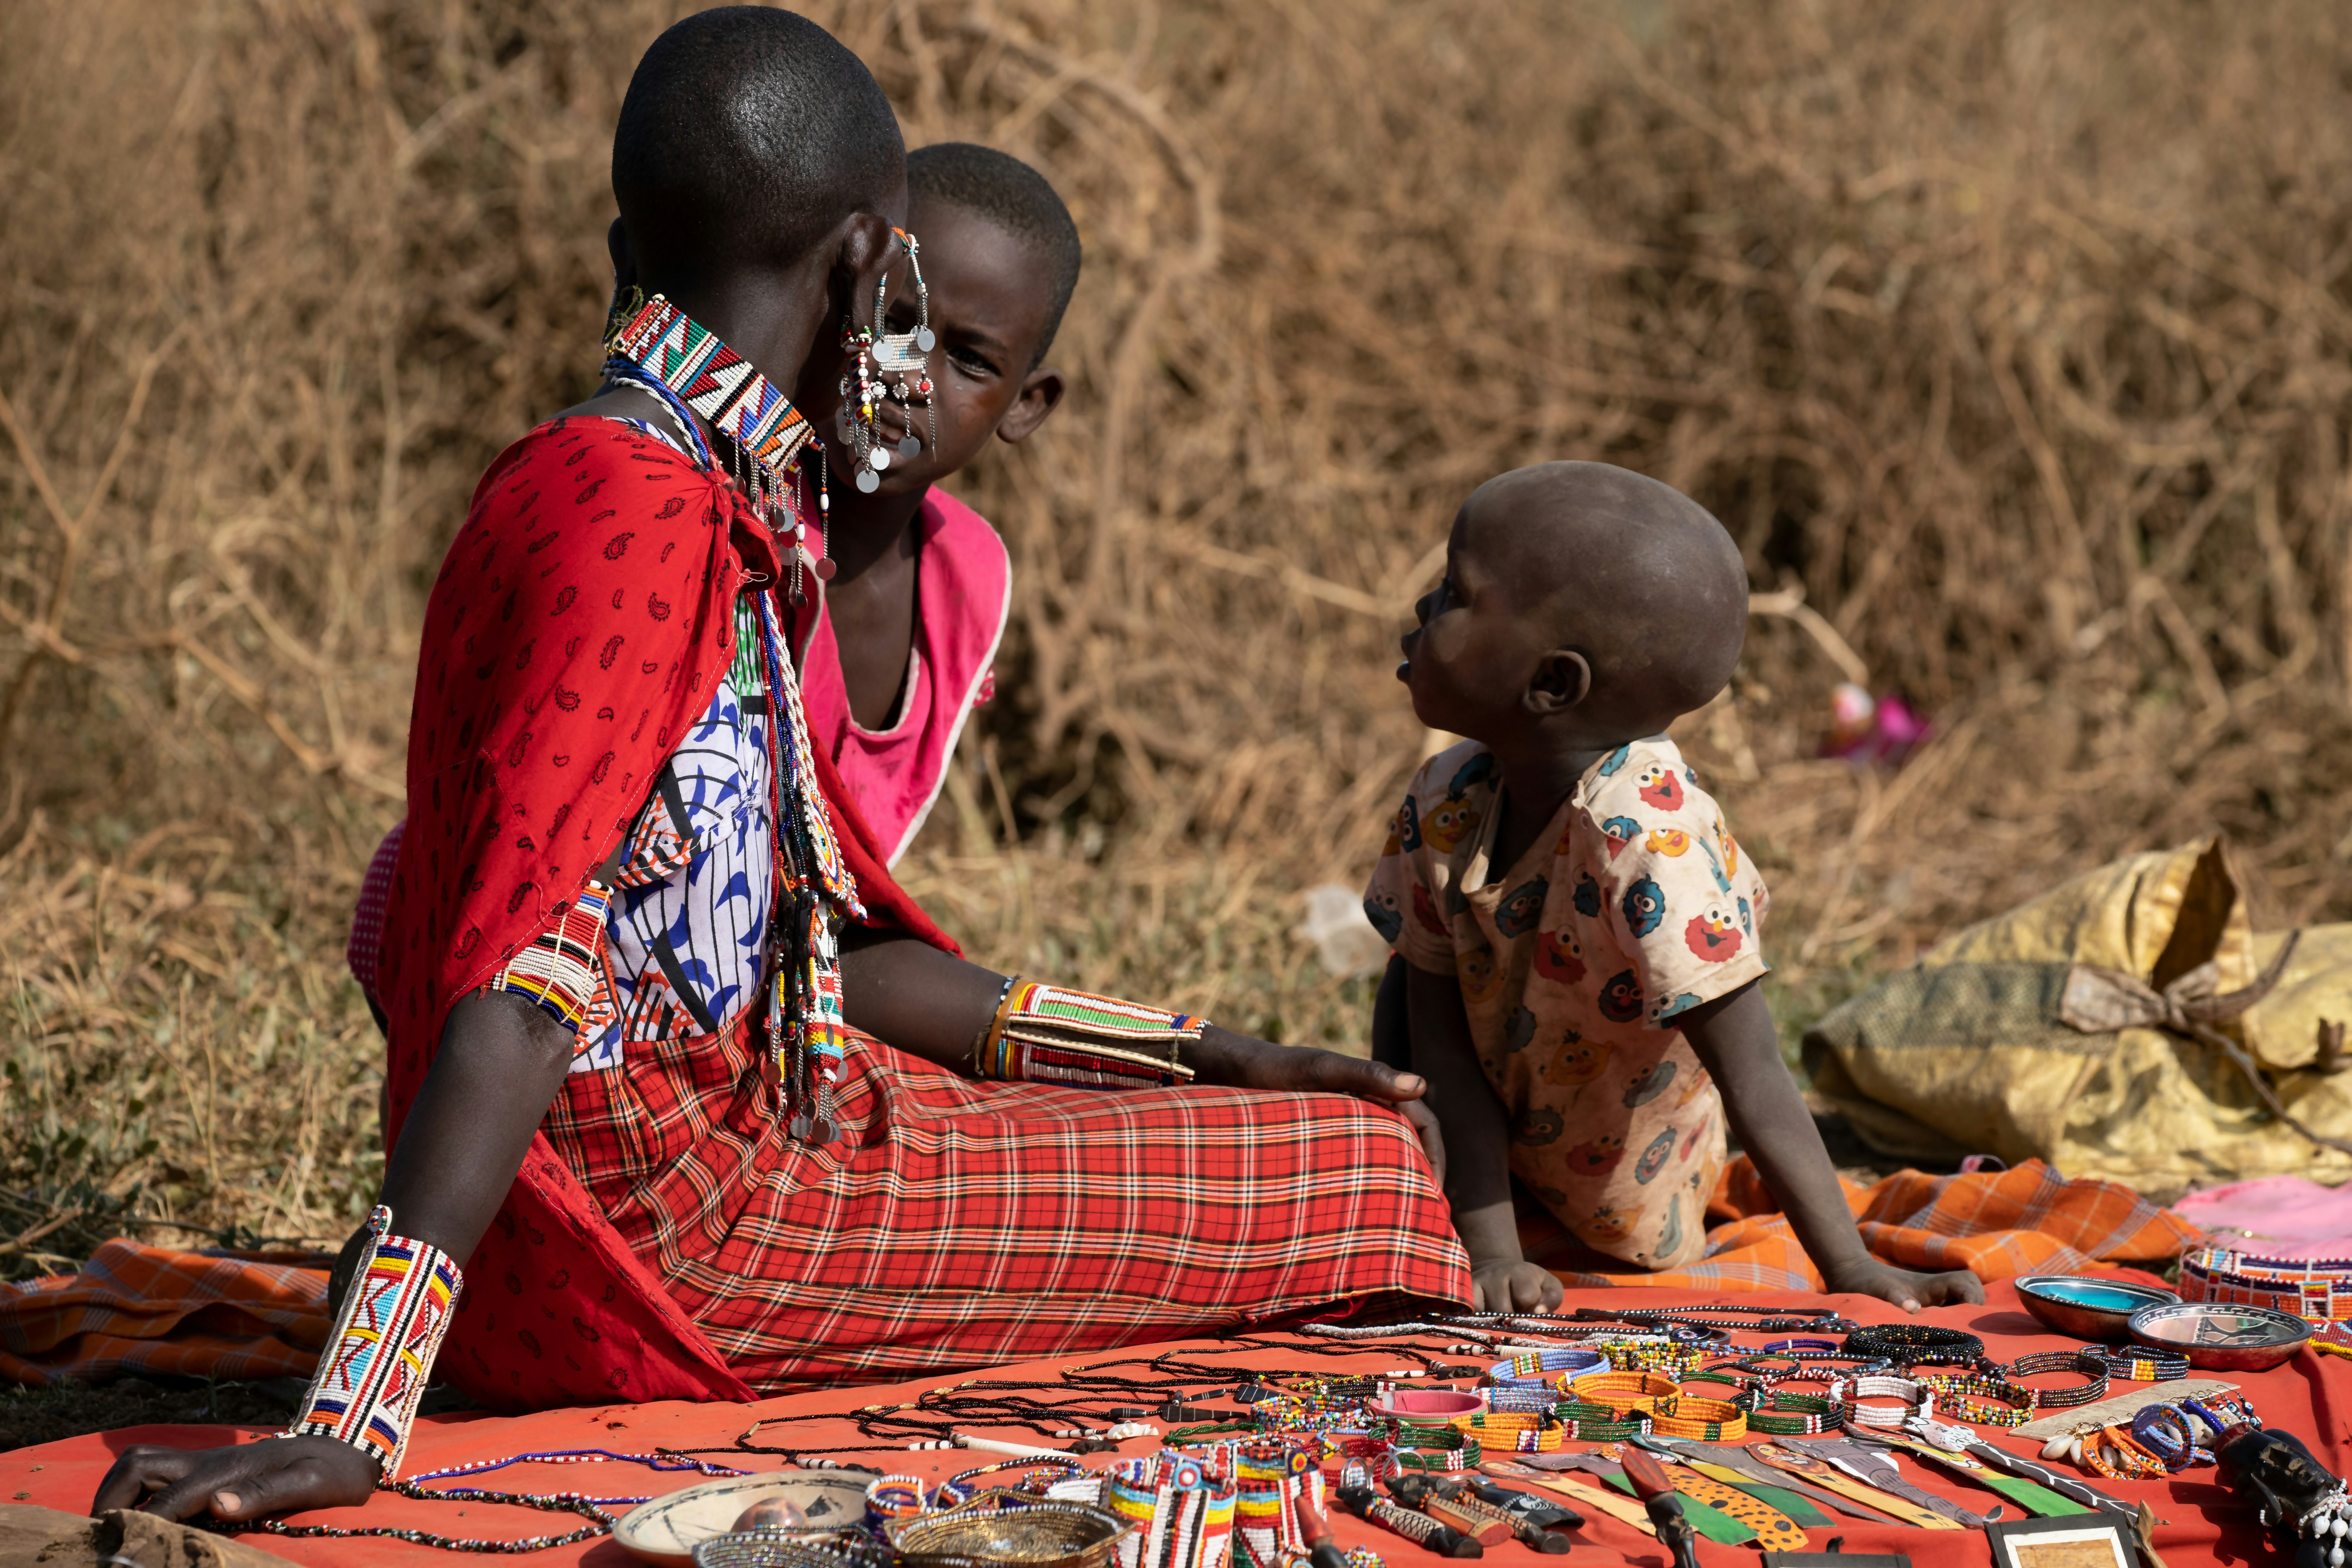 Gulf Princes, Safaris, and Conservation Groups are Destroying the Maasai